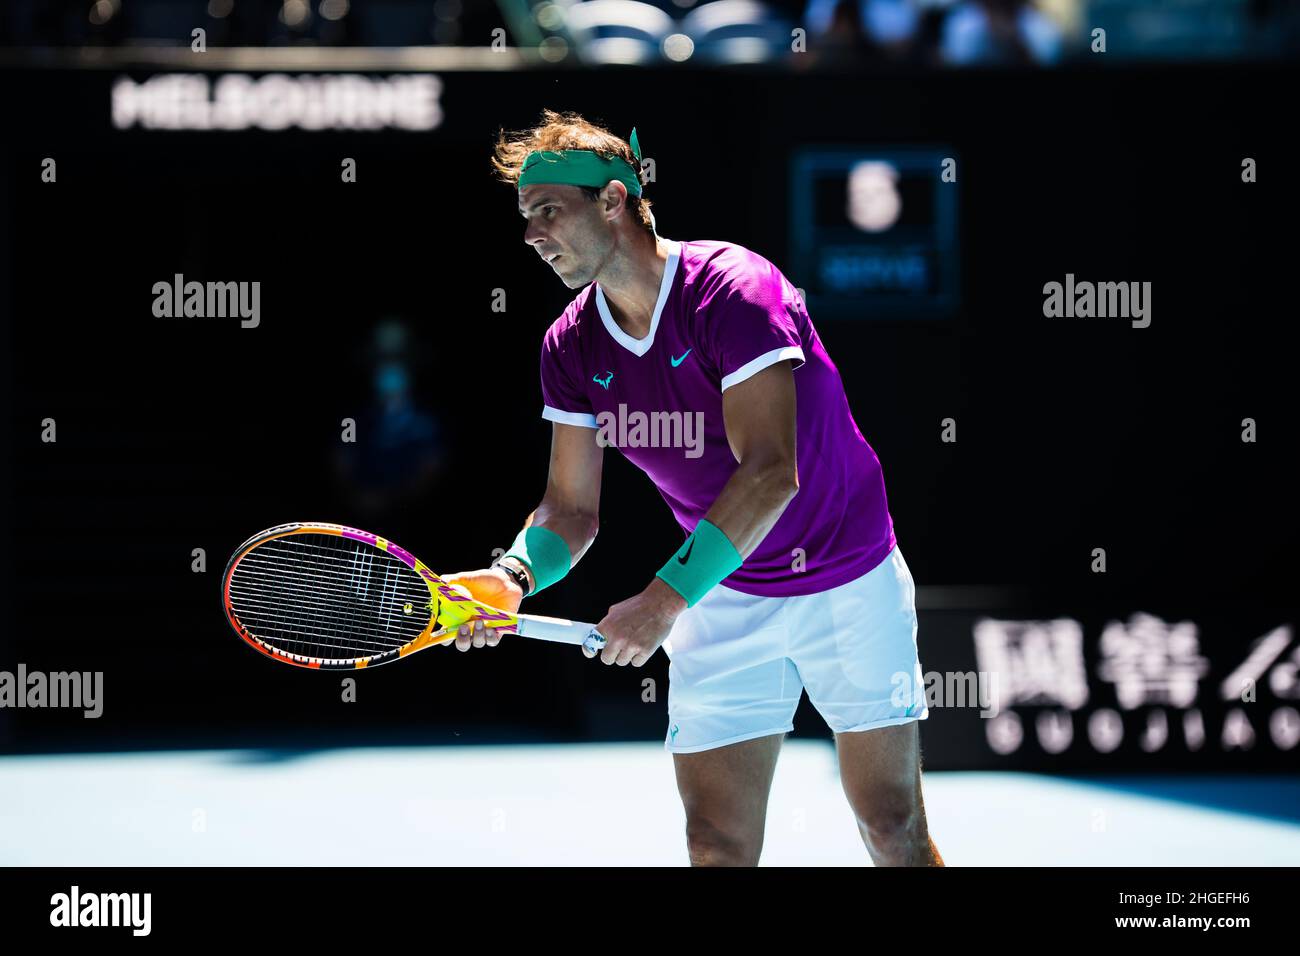 Rafael Nadal in action during the Australian Open 2022 Round 1 match of the Grand Slam at Rod Laver Arena in Melbourne Olympic Park.(Final score Nadal wins in 3 sets 61, 64,